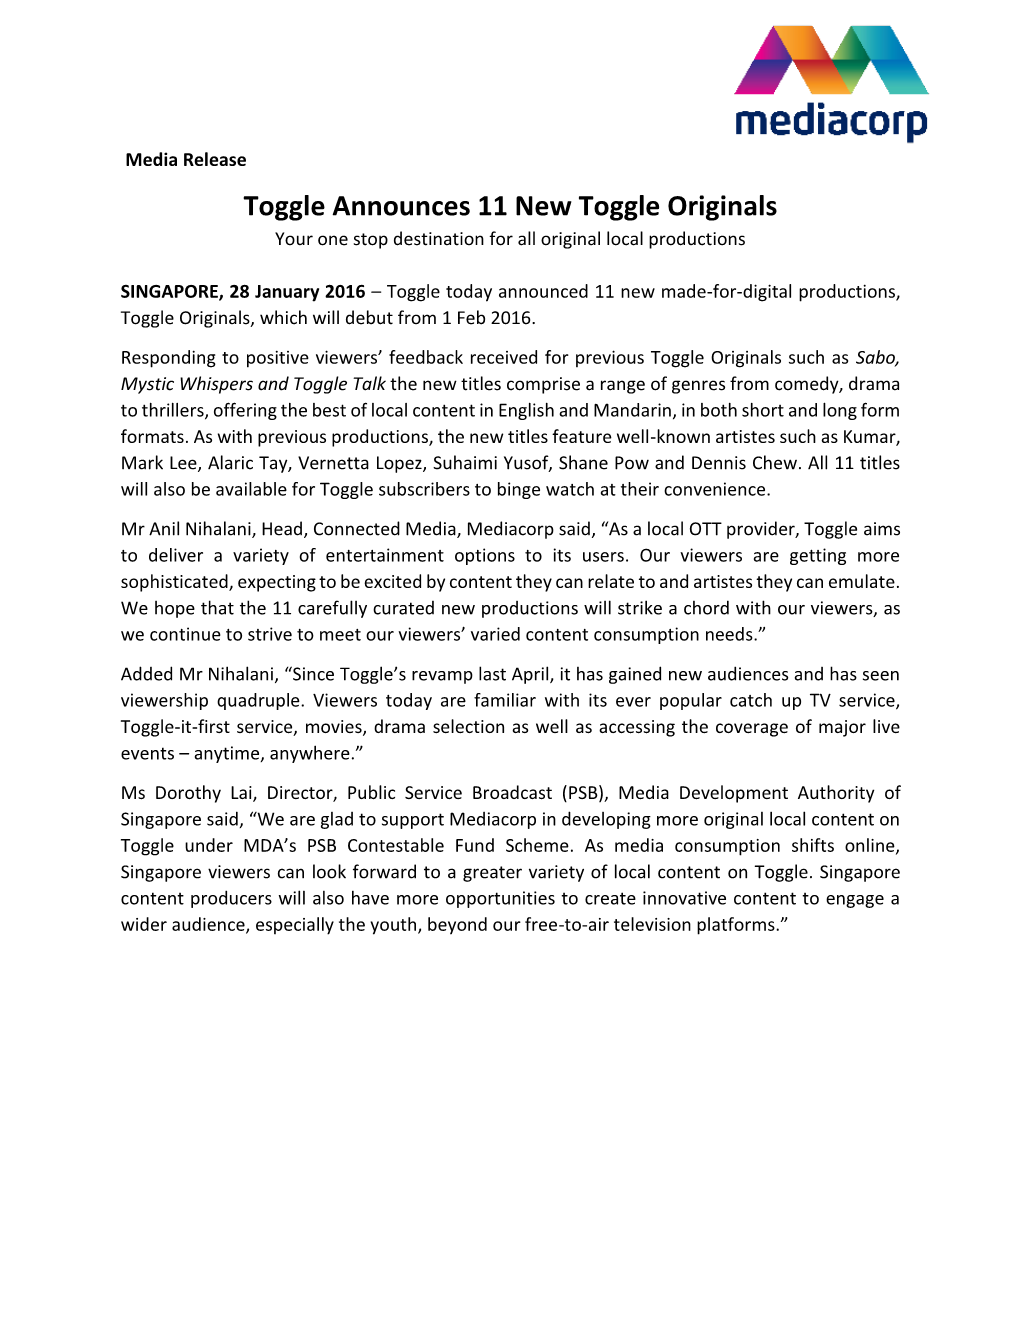 Toggle Announces 11 New Toggle Originals Your One Stop Destination for All Original Local Productions